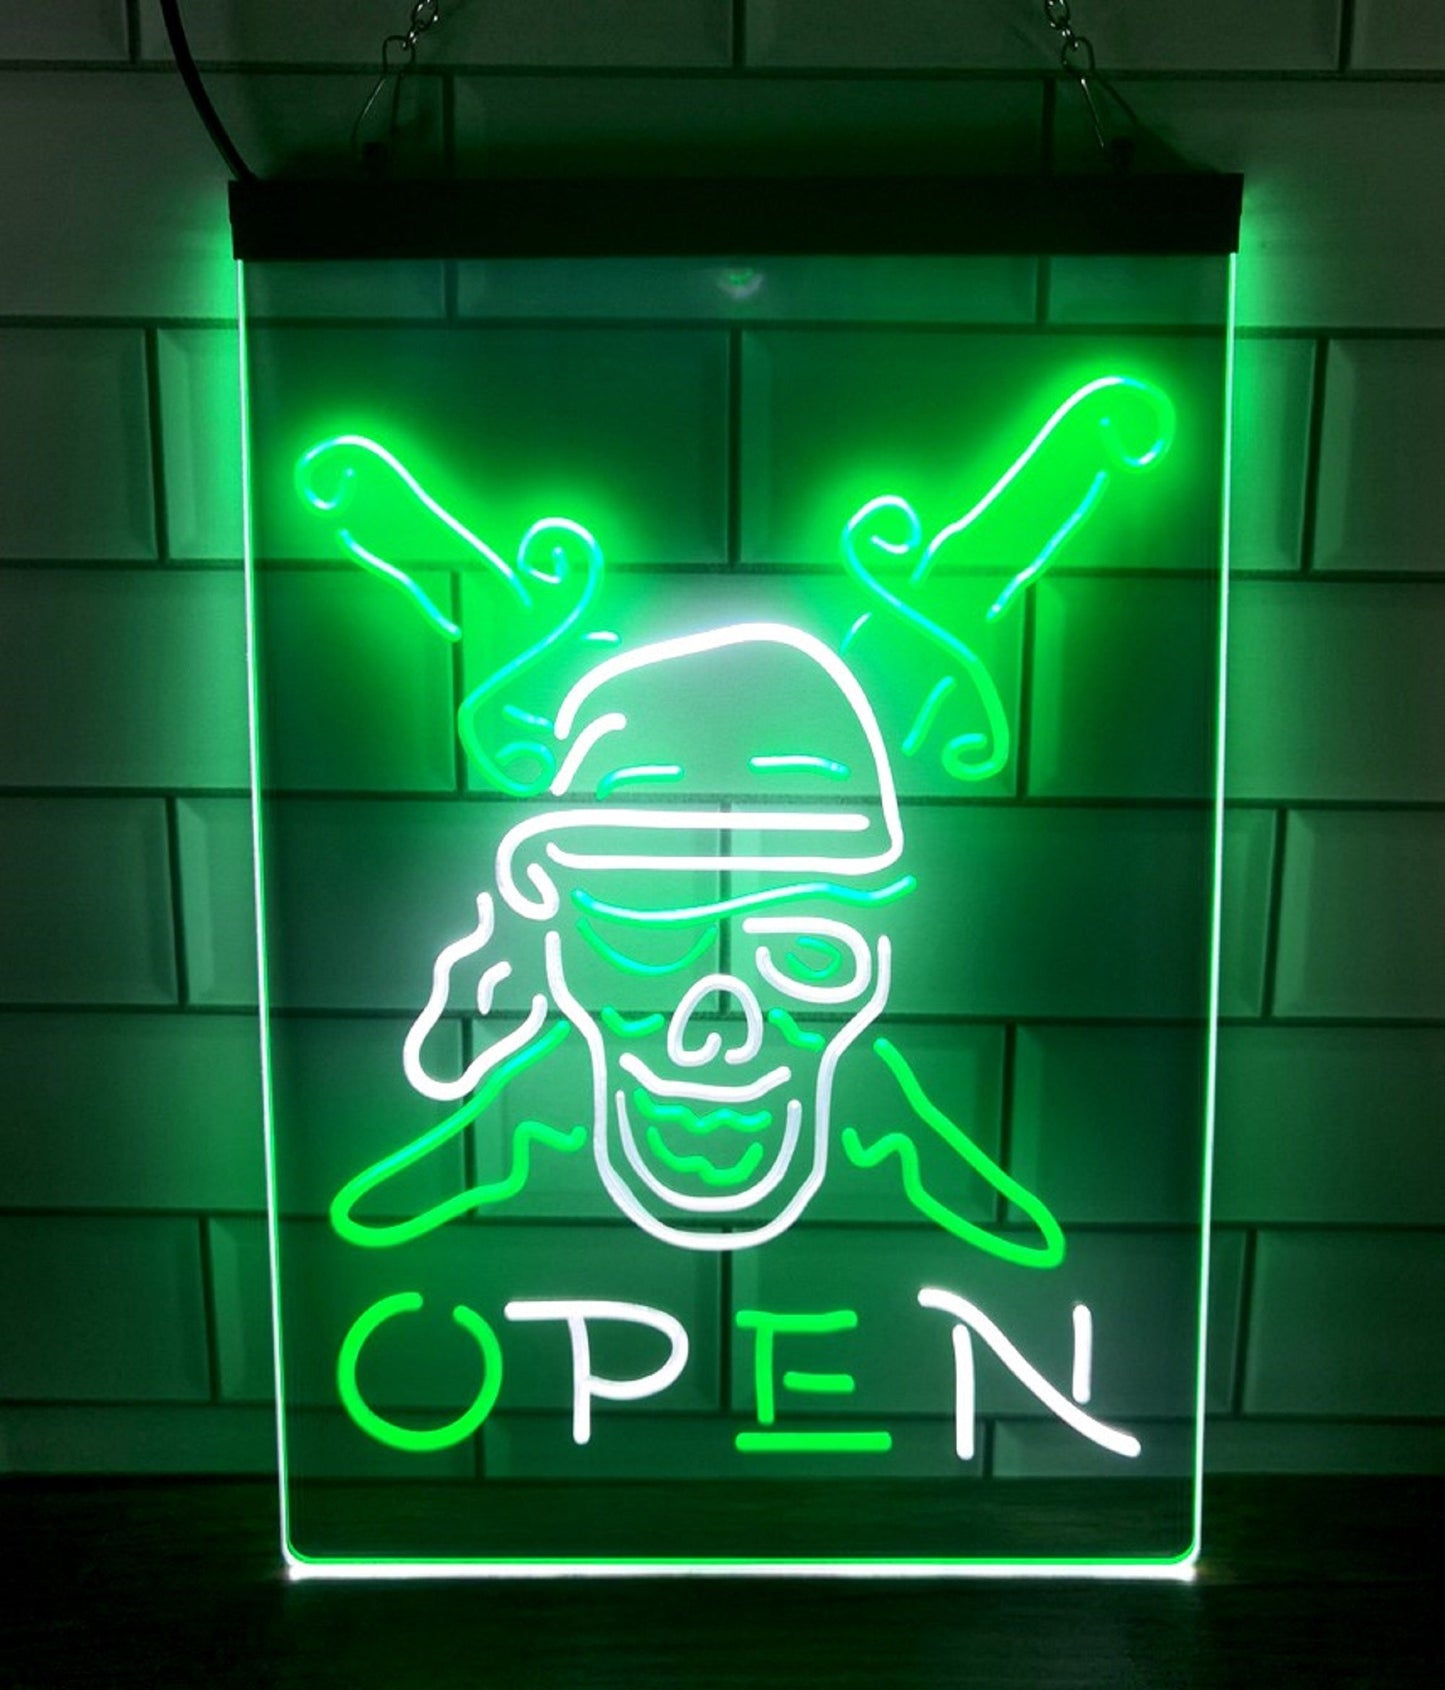 Neon Sign Dual Color Pirate Open Man Cave Wall Hanging Table Top Decor